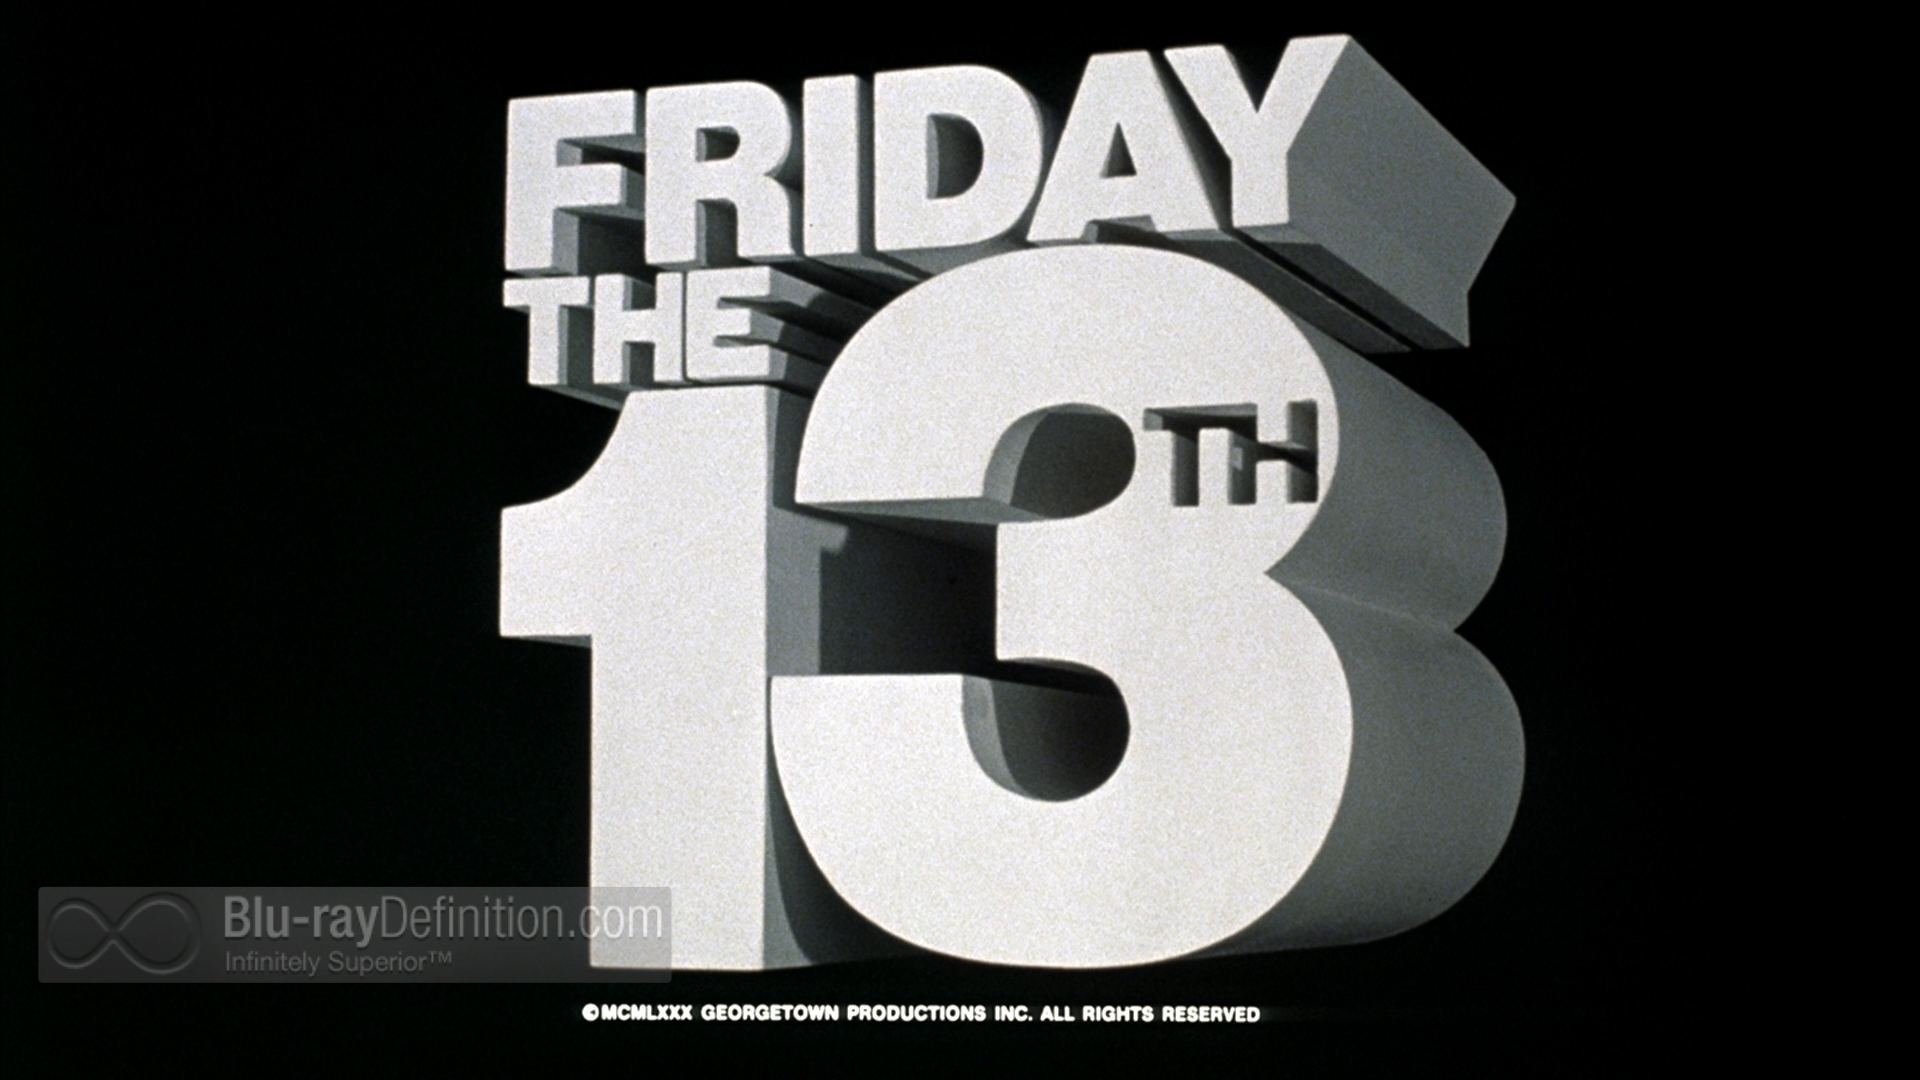 Friday the 13th: The Complete Collection Blu-ray Review